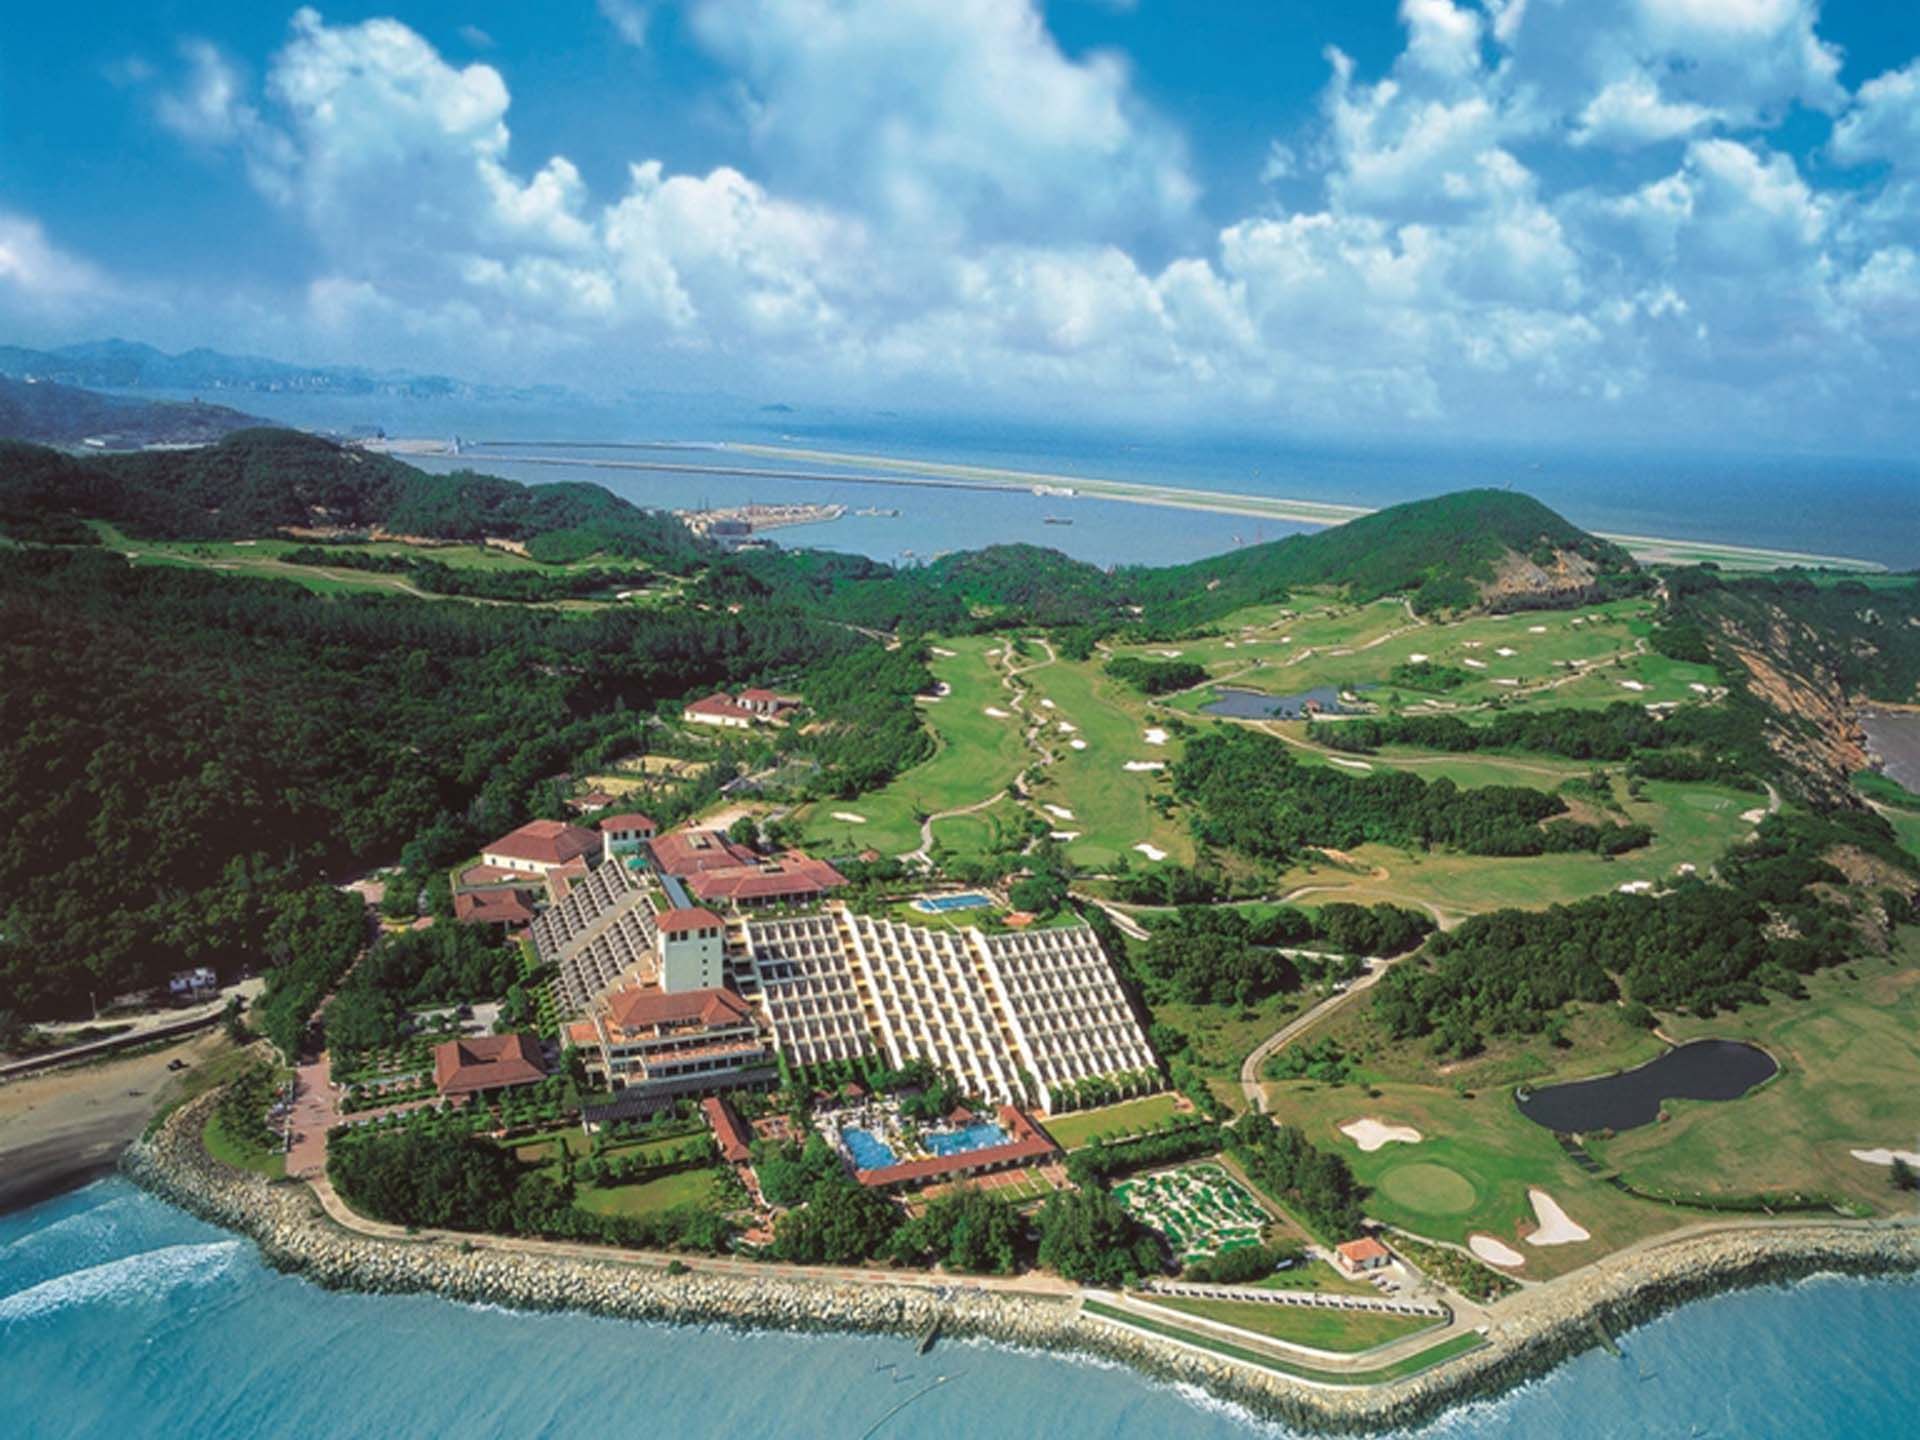 Aerial view of the Grand Coloane Resort near the Ocean